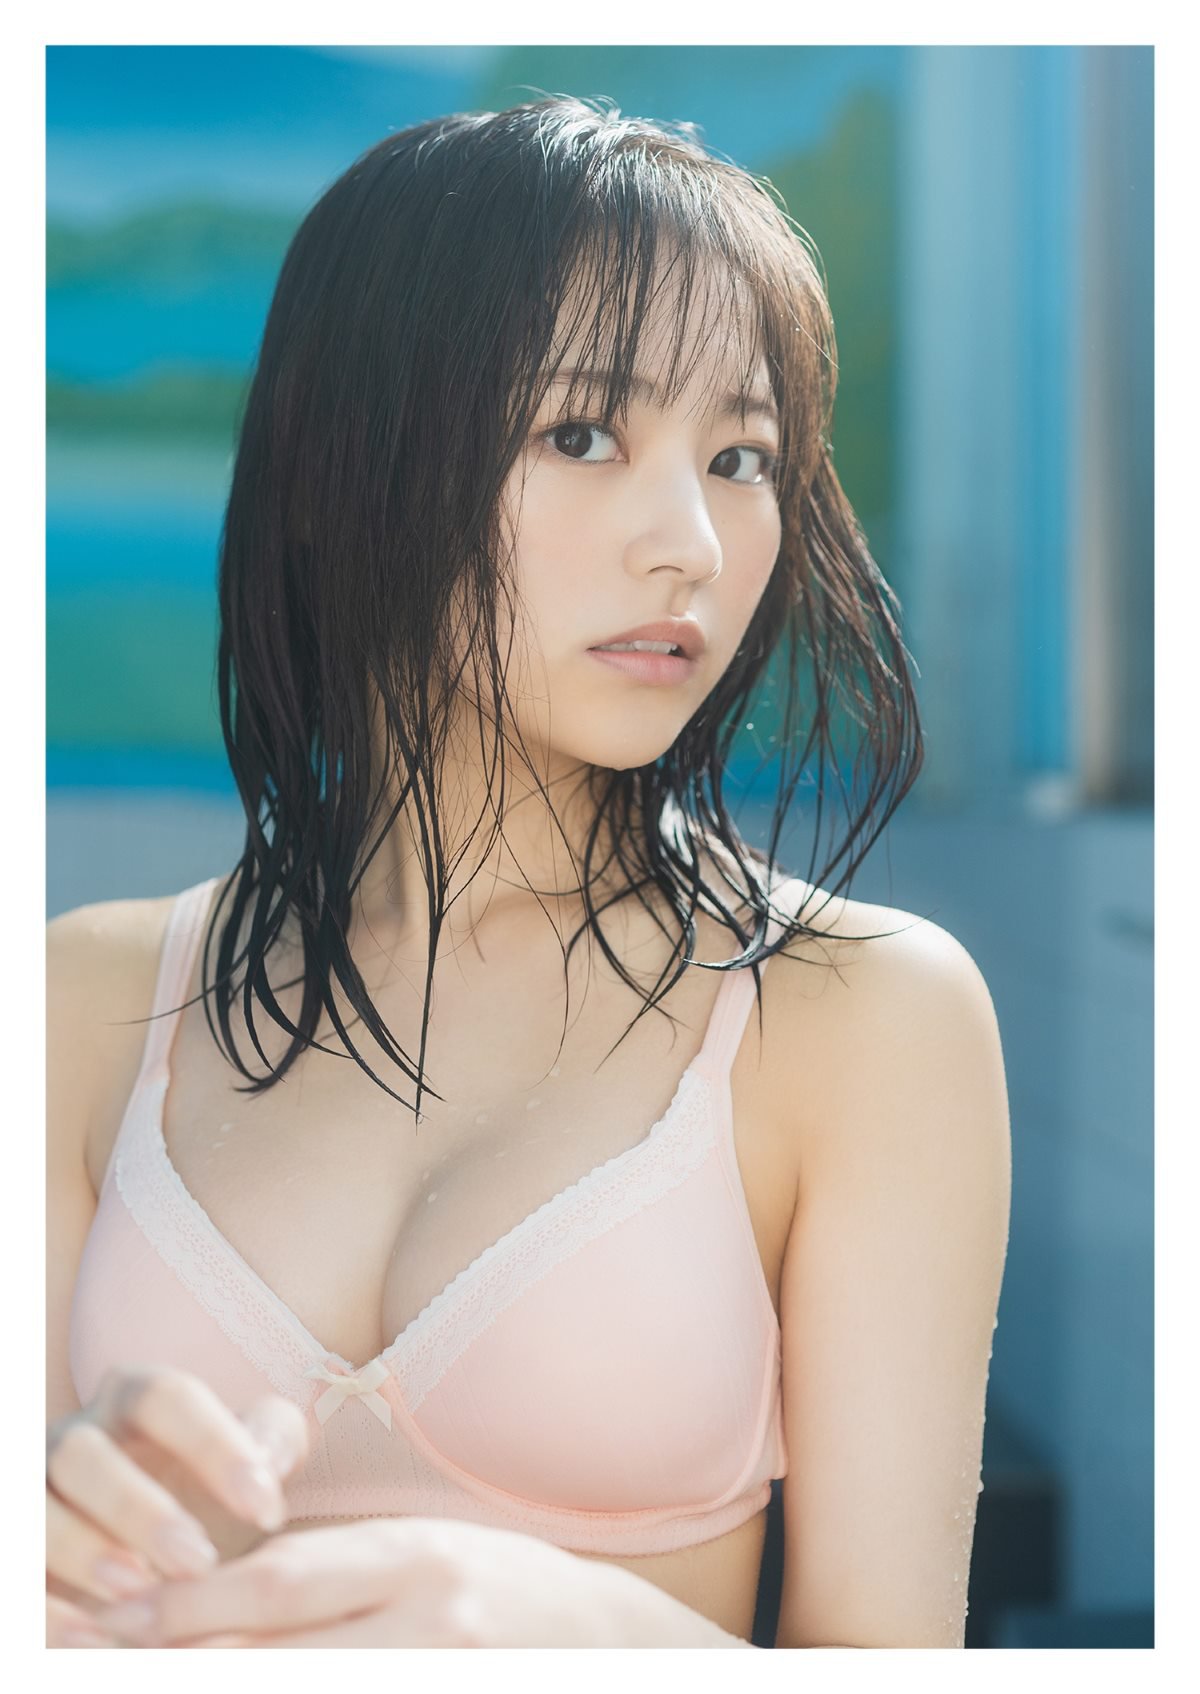 YJ Photobook Usa 宇咲 The only daughter of a public bath is training as a trimmer 銭湯のひとり娘は、トリマー修行中 2022 04 21 0009 5360207962.jpg